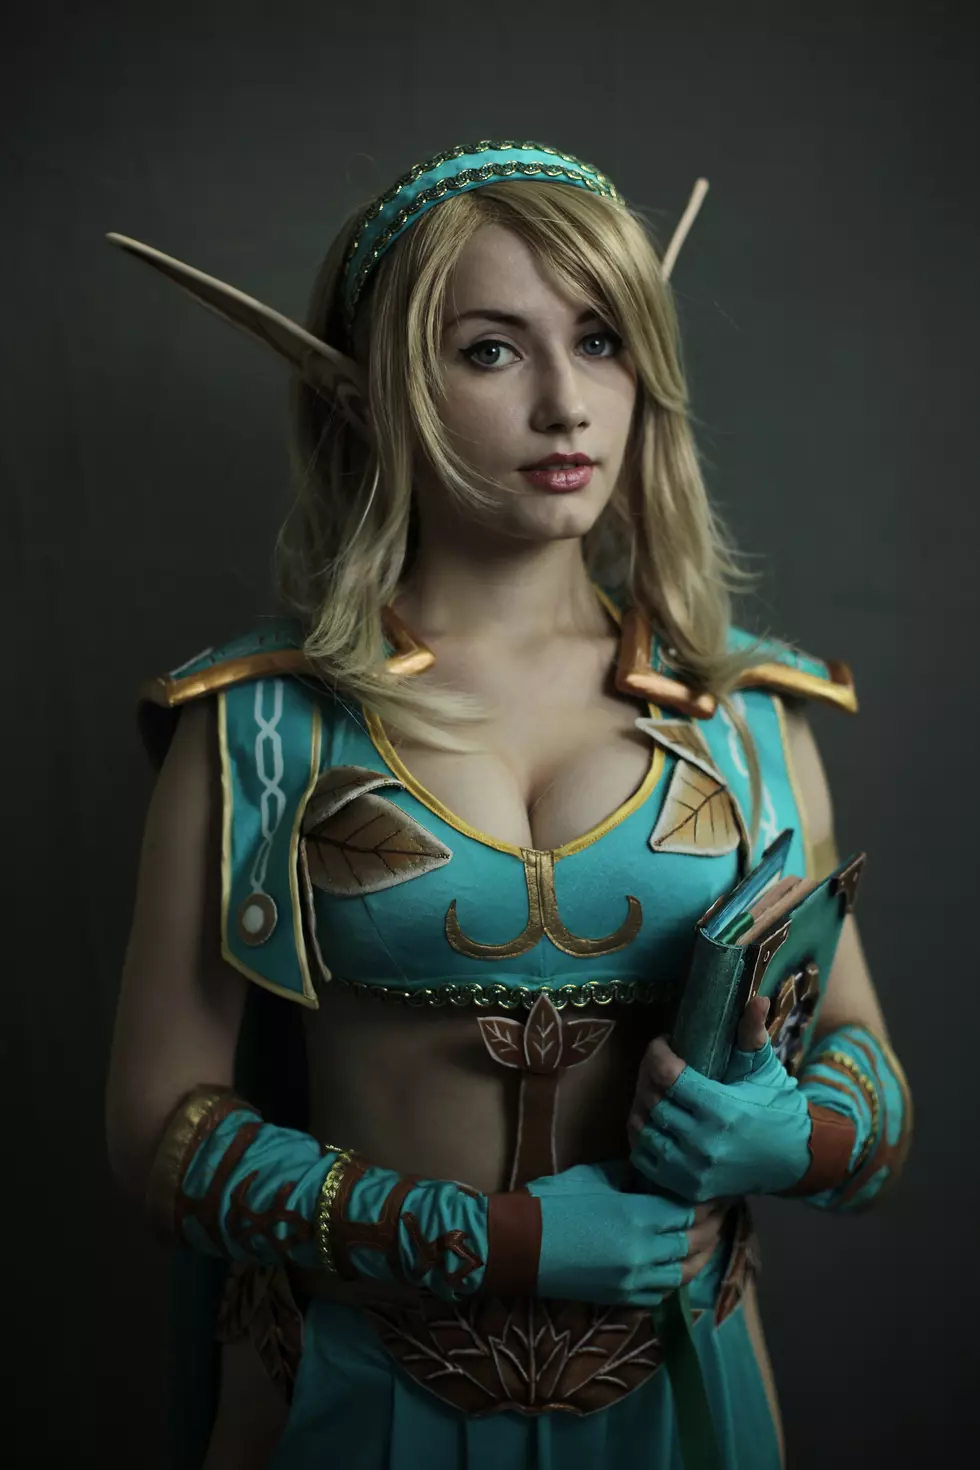 Cosplay babe